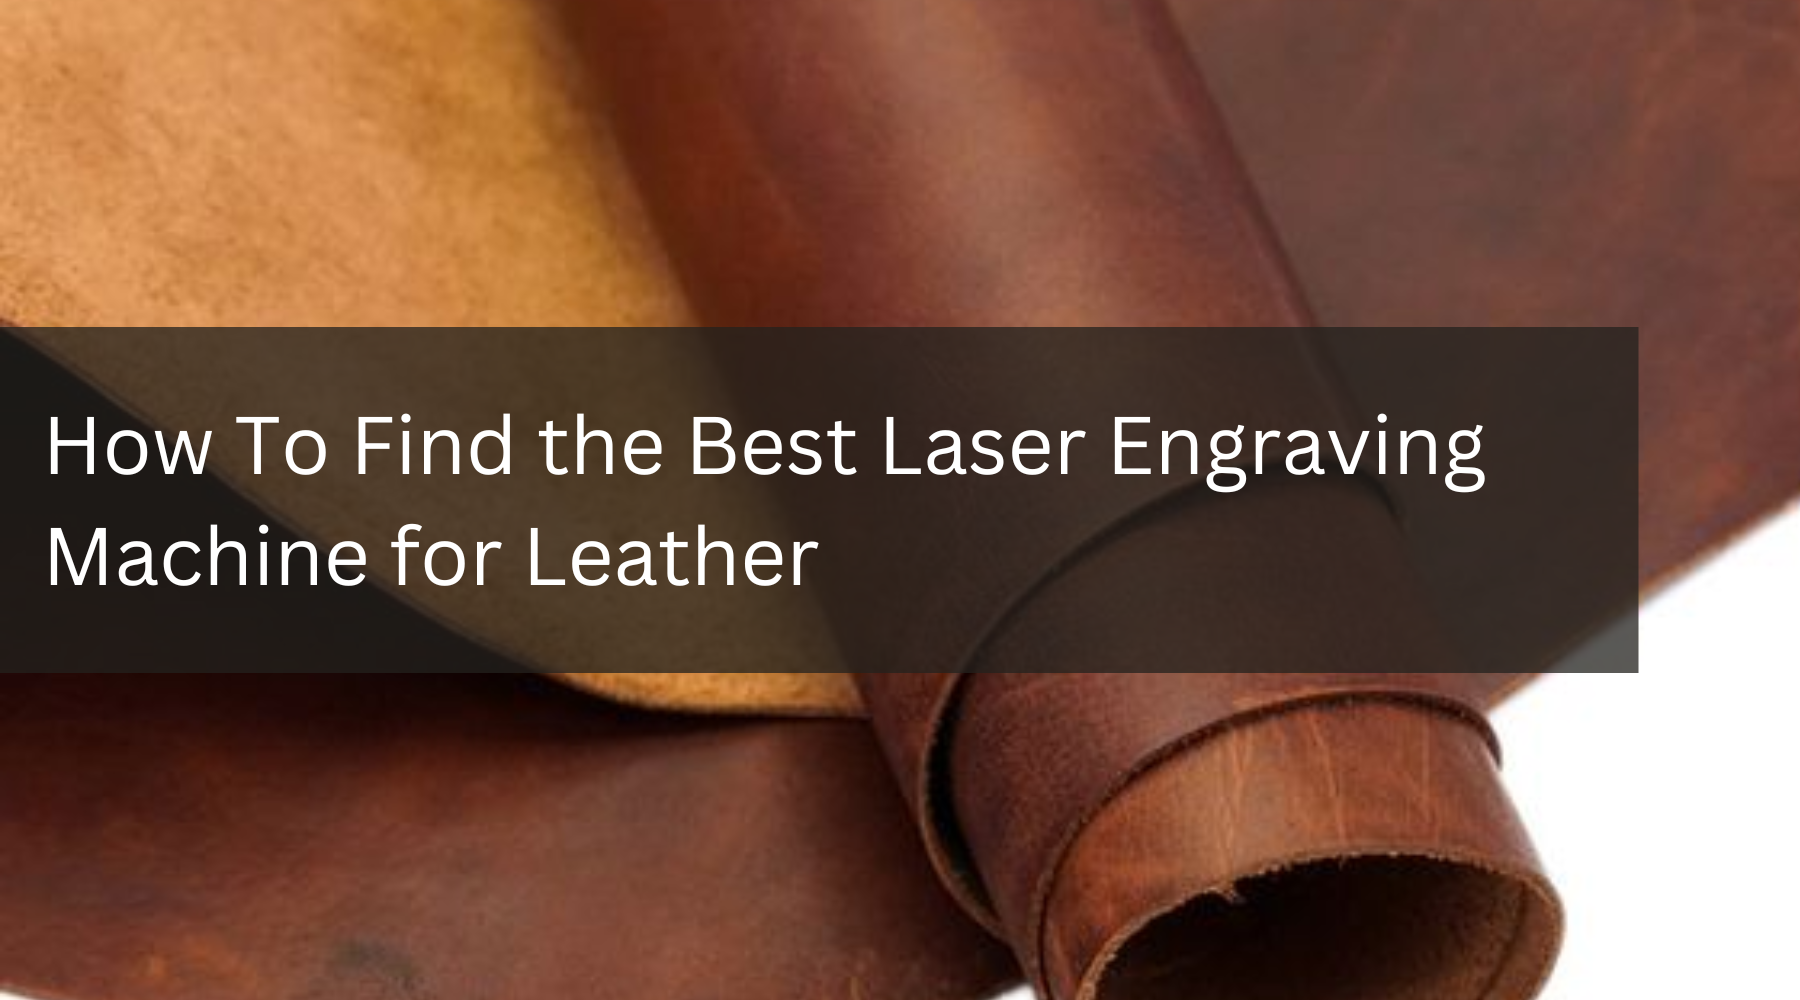 How To Find the Best Laser Engraving Machine for Leather